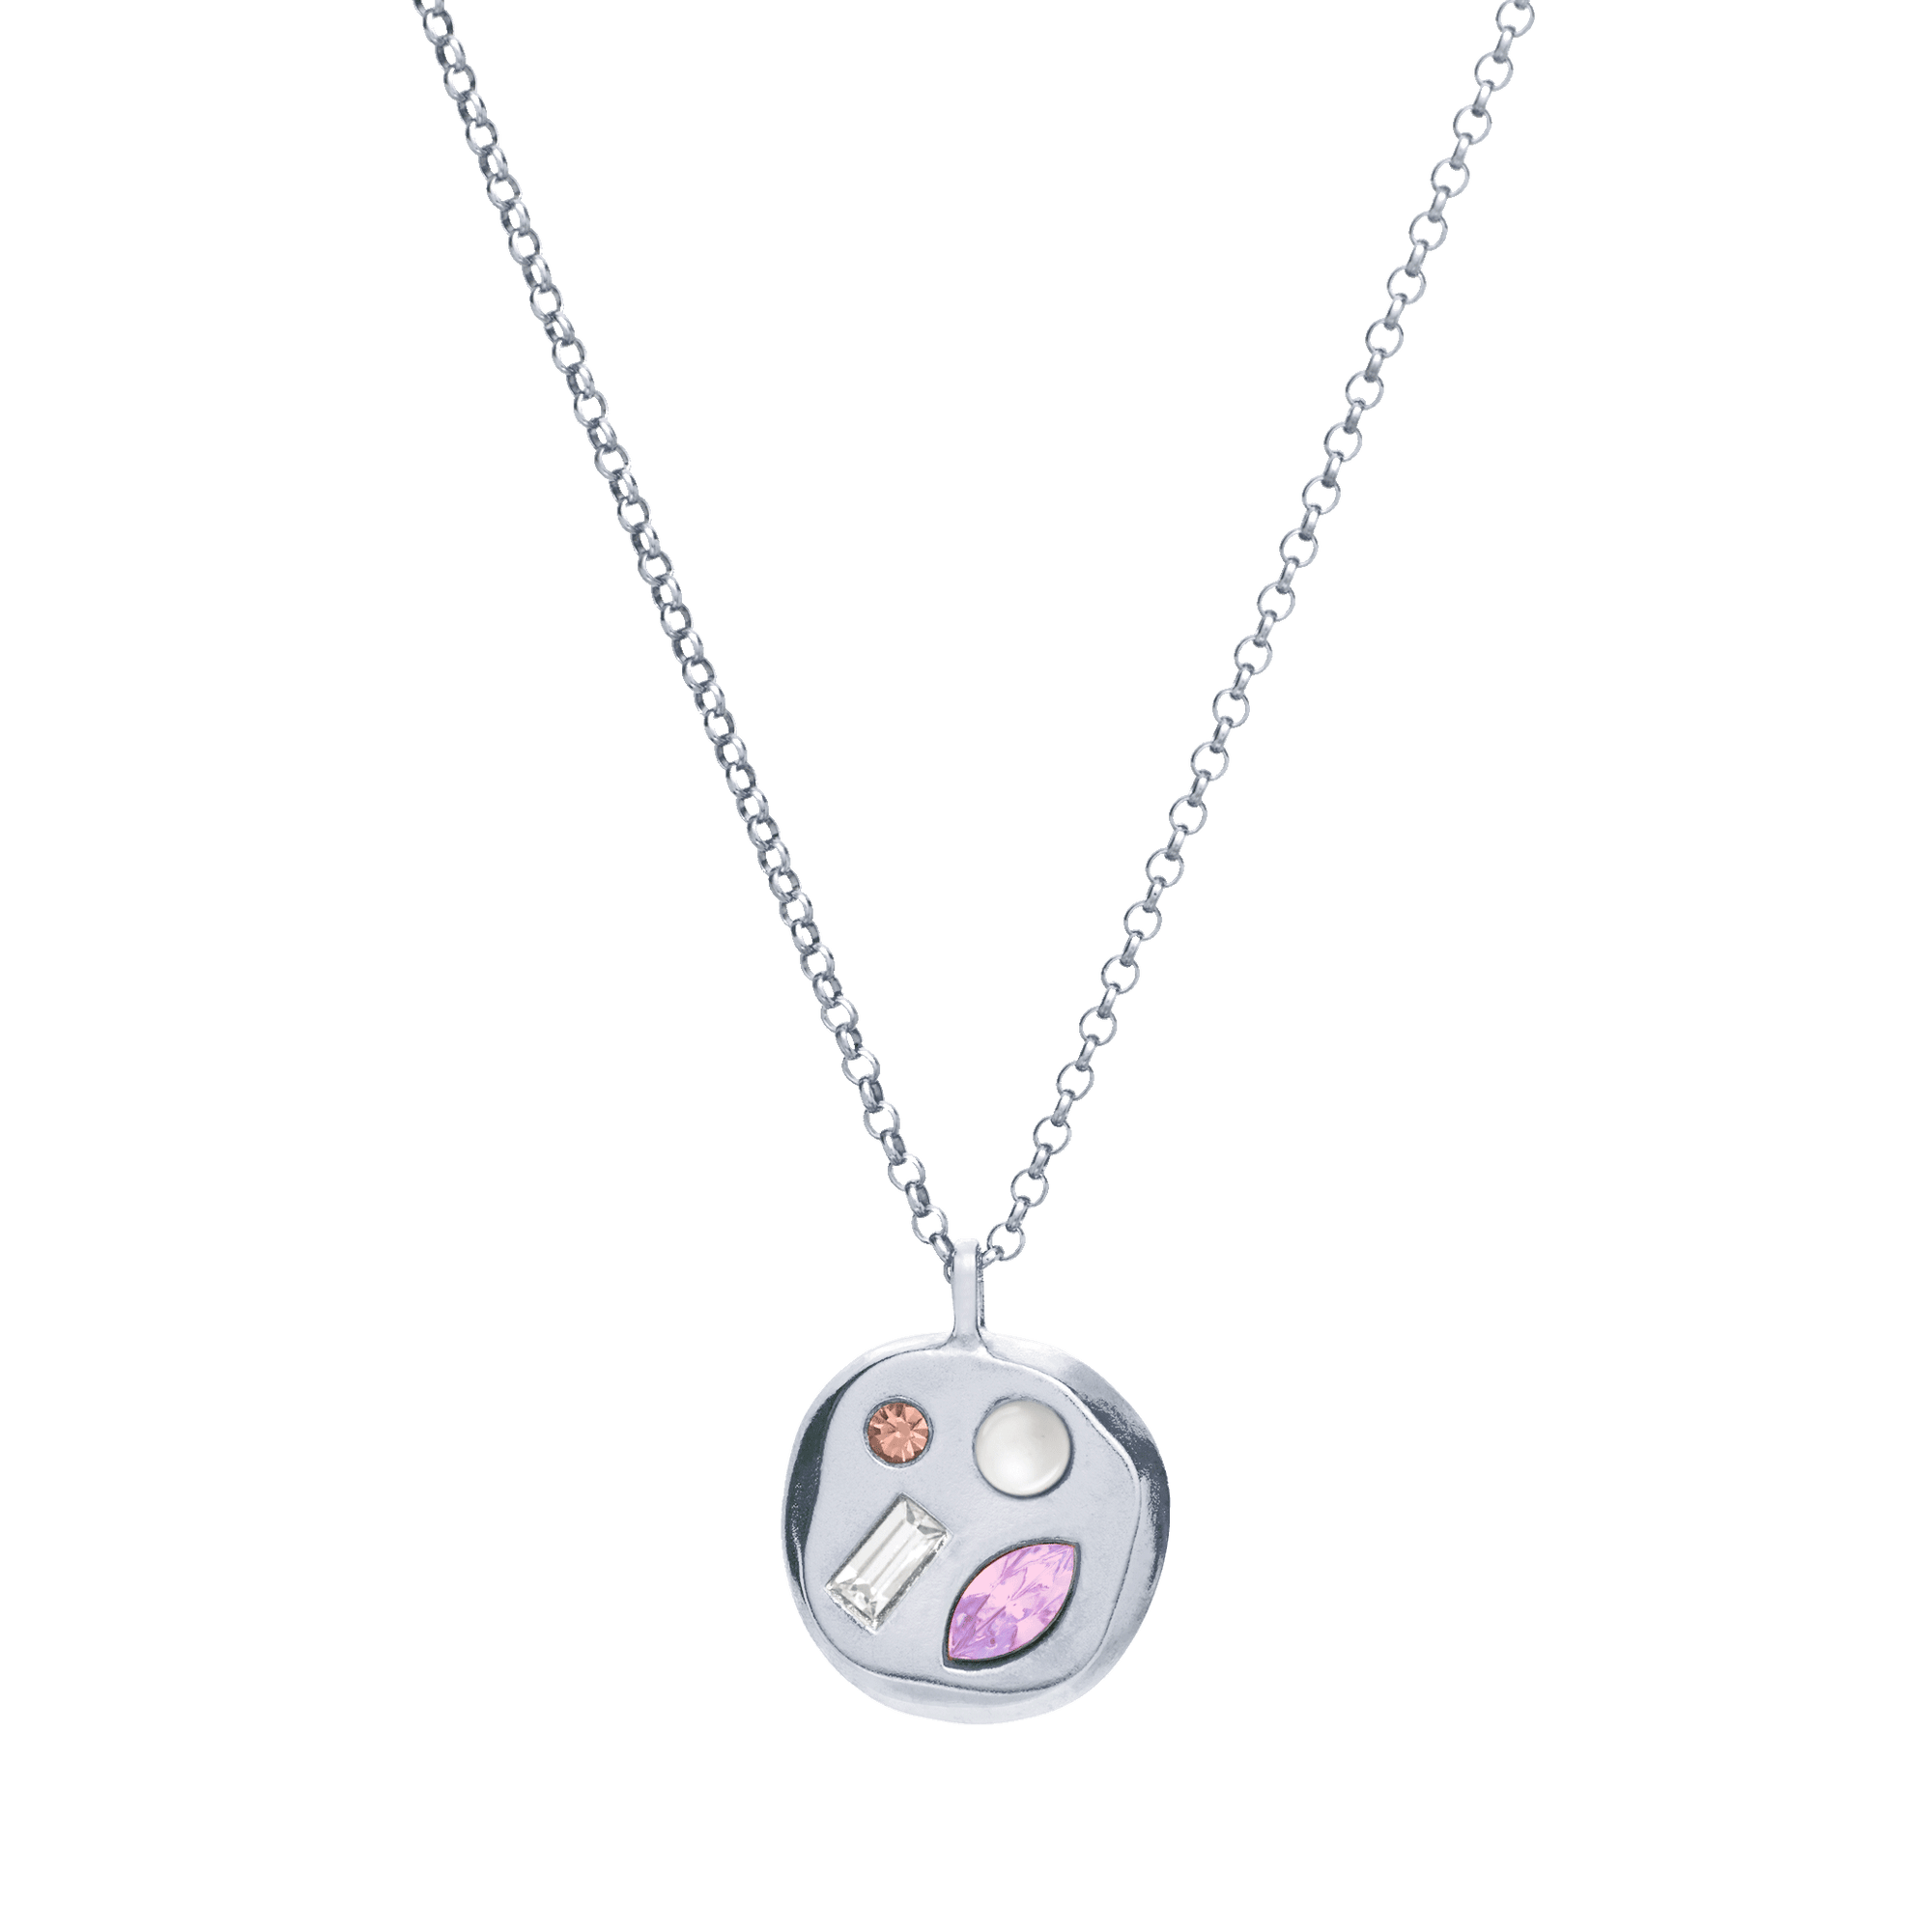 The June Seventeenth Pendant in Sterling Silver